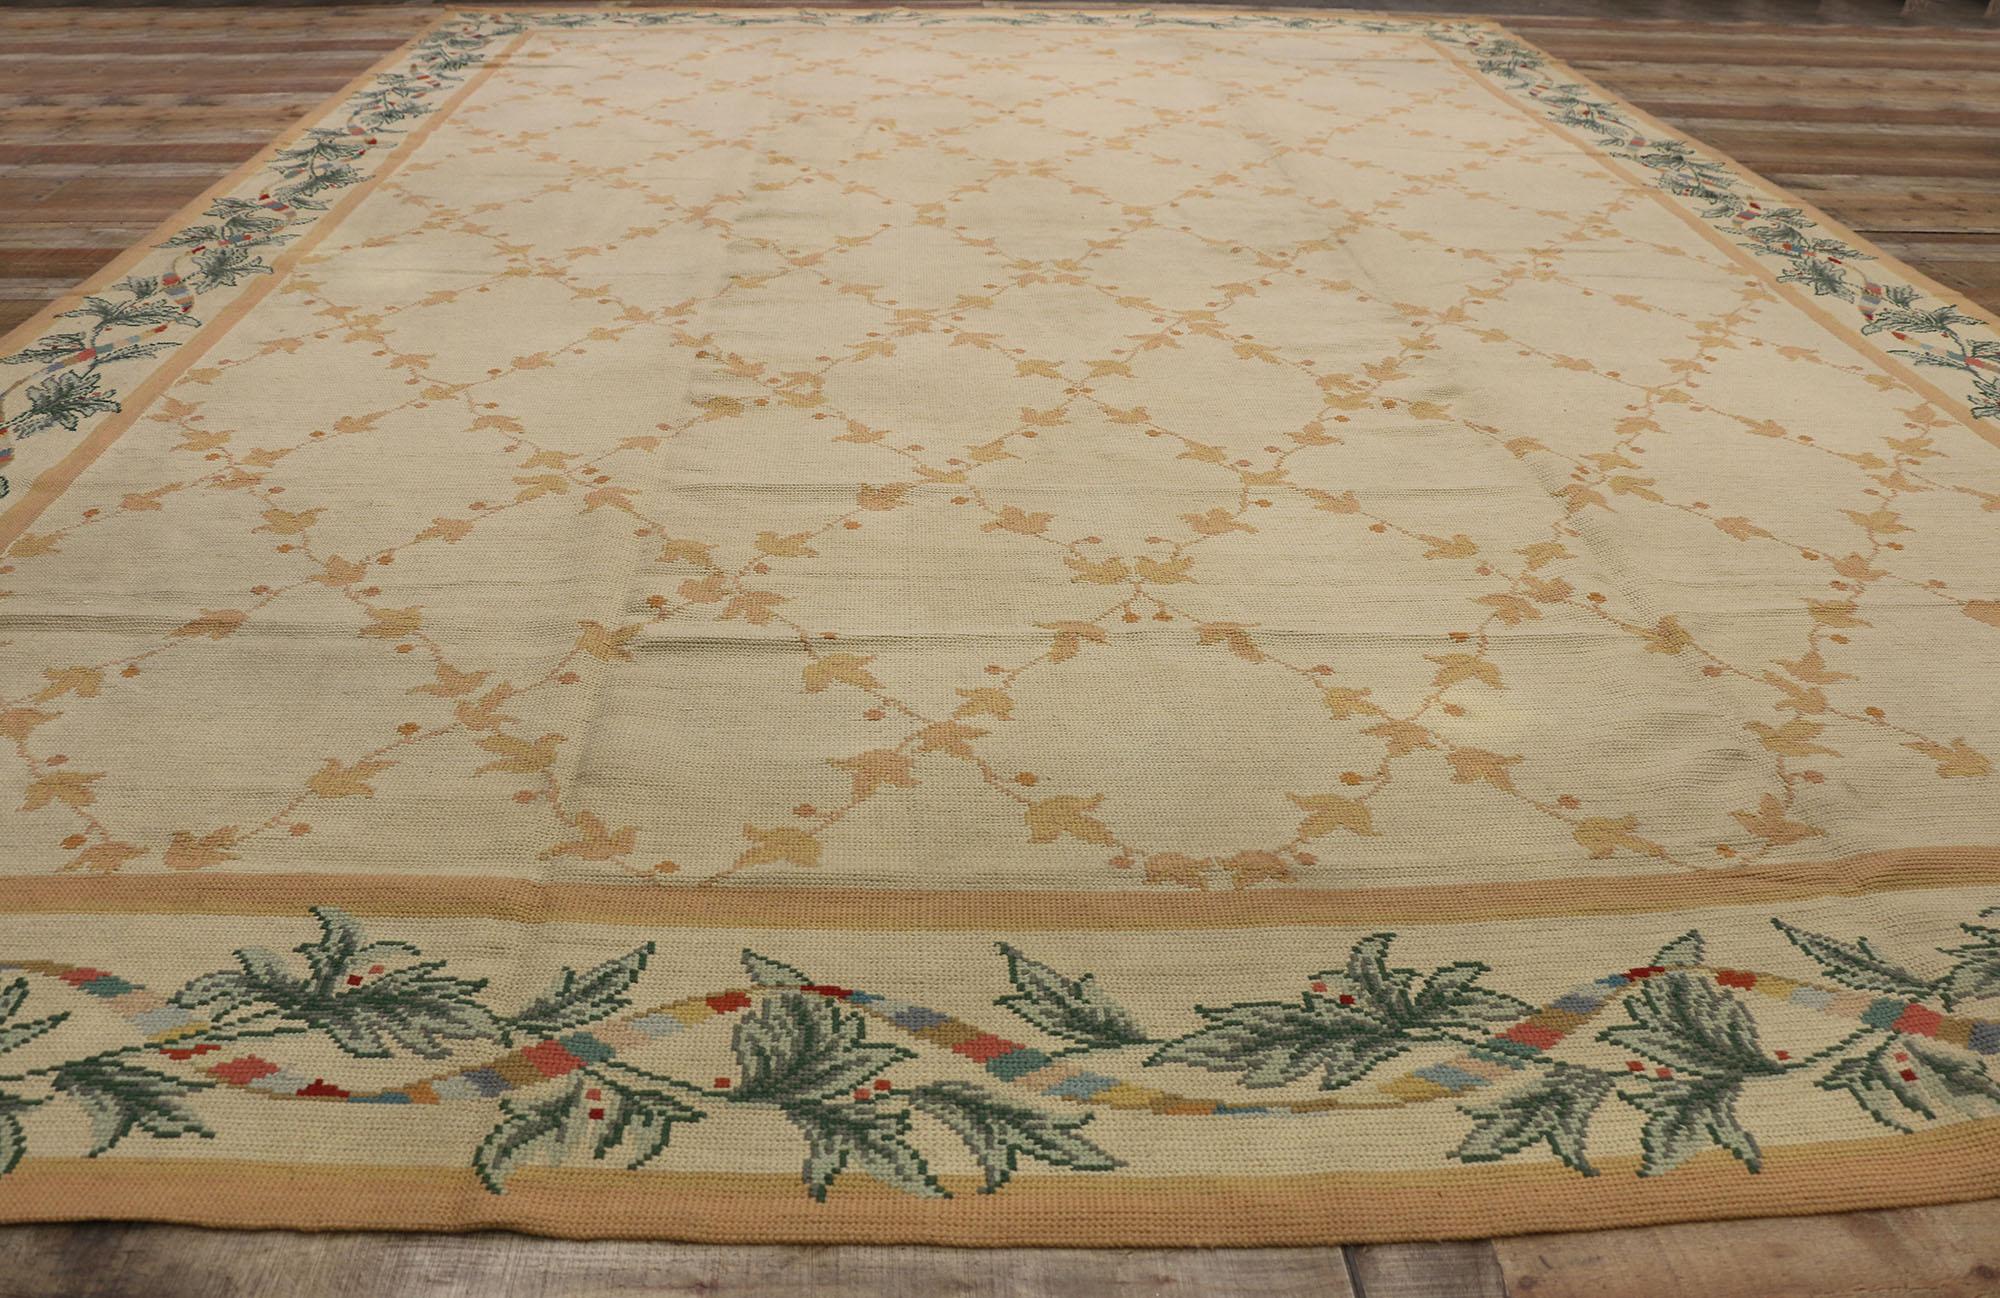 Vintage Spanish Needlepoint Carpet with English Country Charm For Sale 1